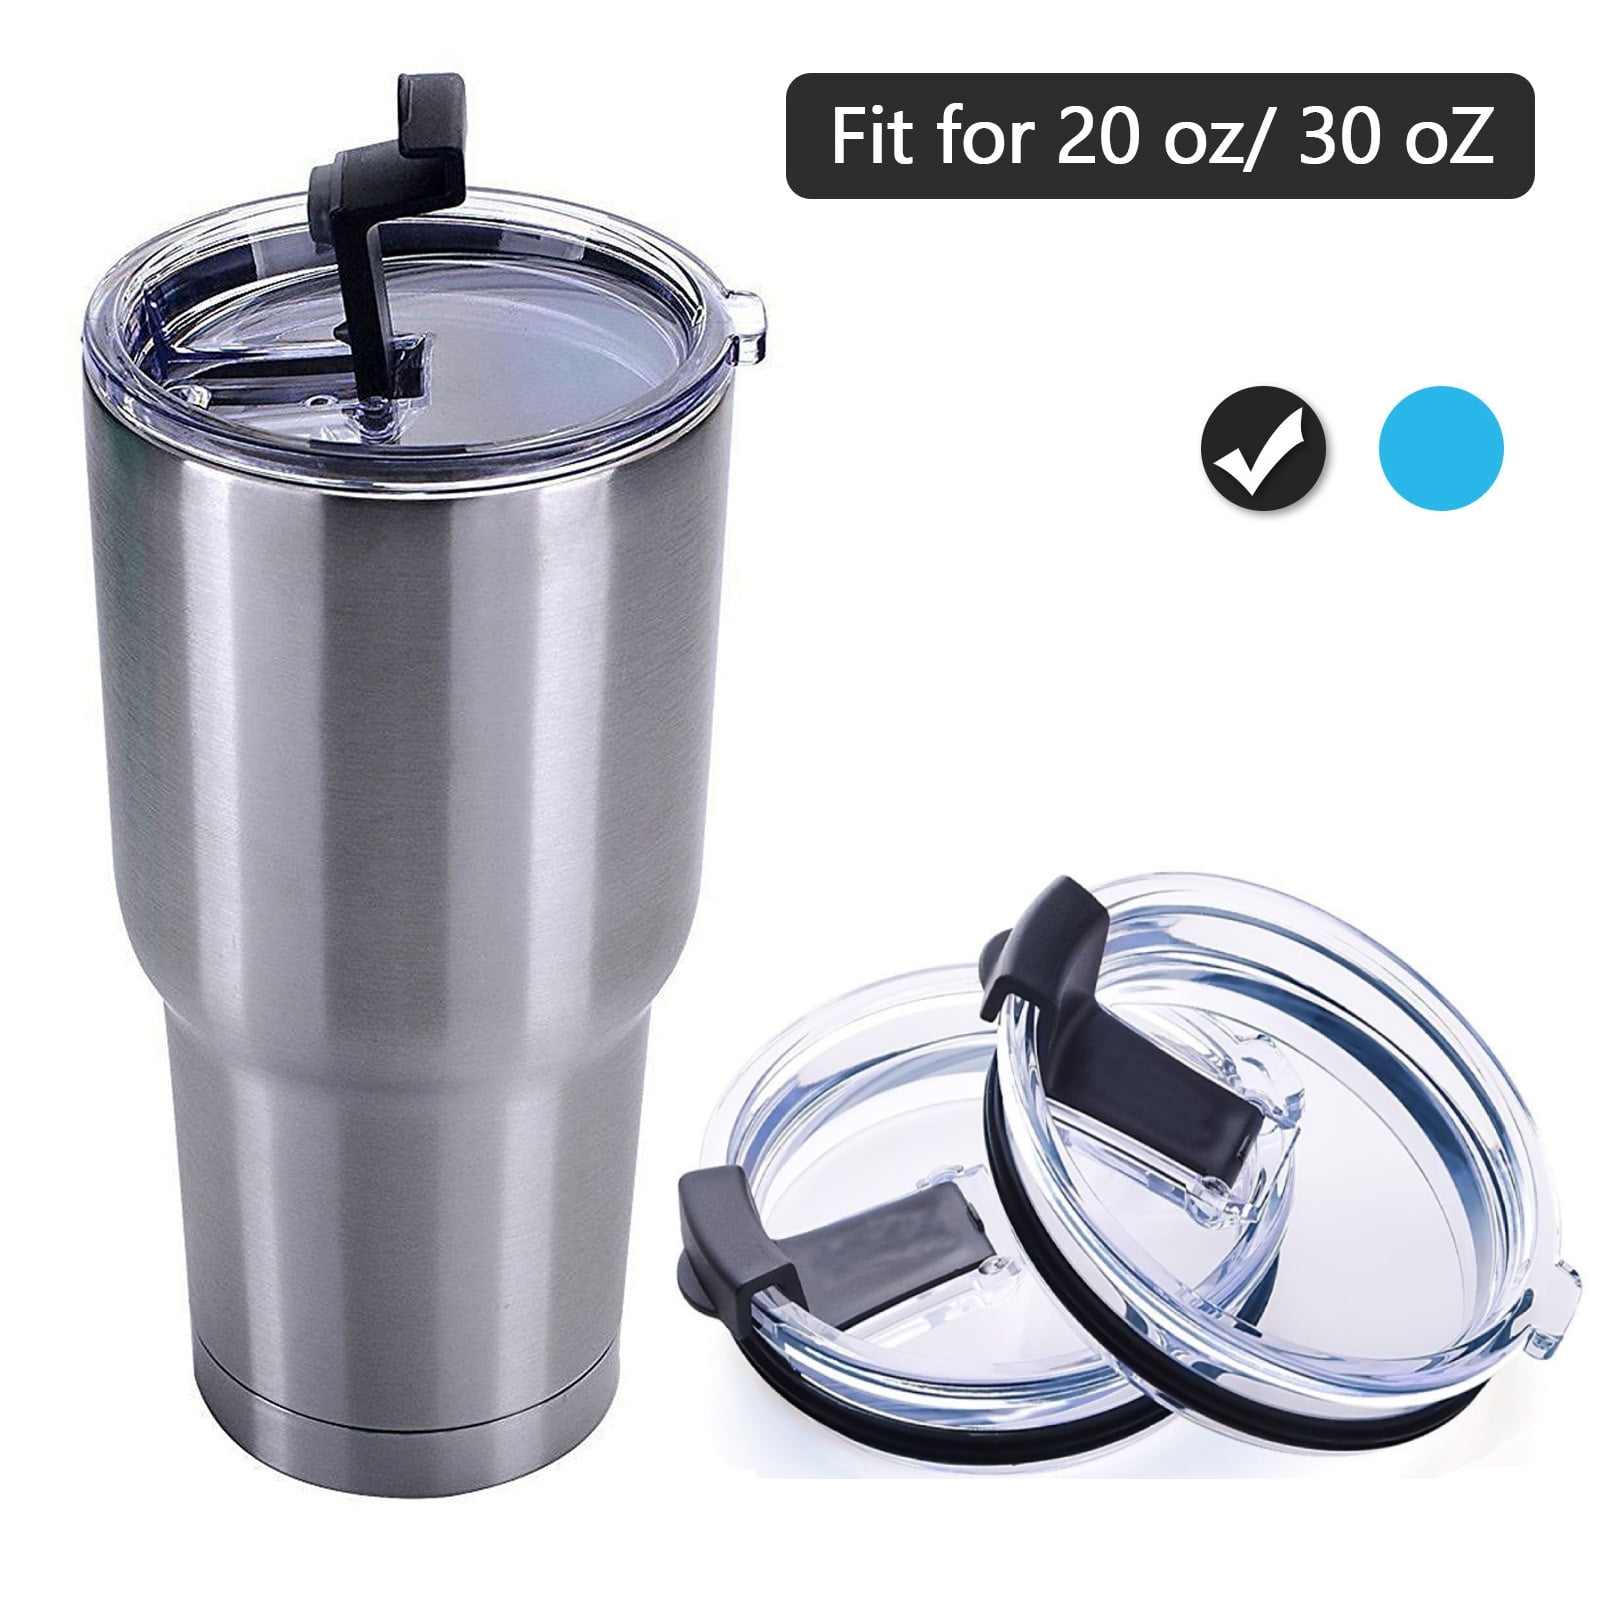 2 Vacuum Spill Proof Splash Resistant Lids Covers Replacement for Tumbler Cups 